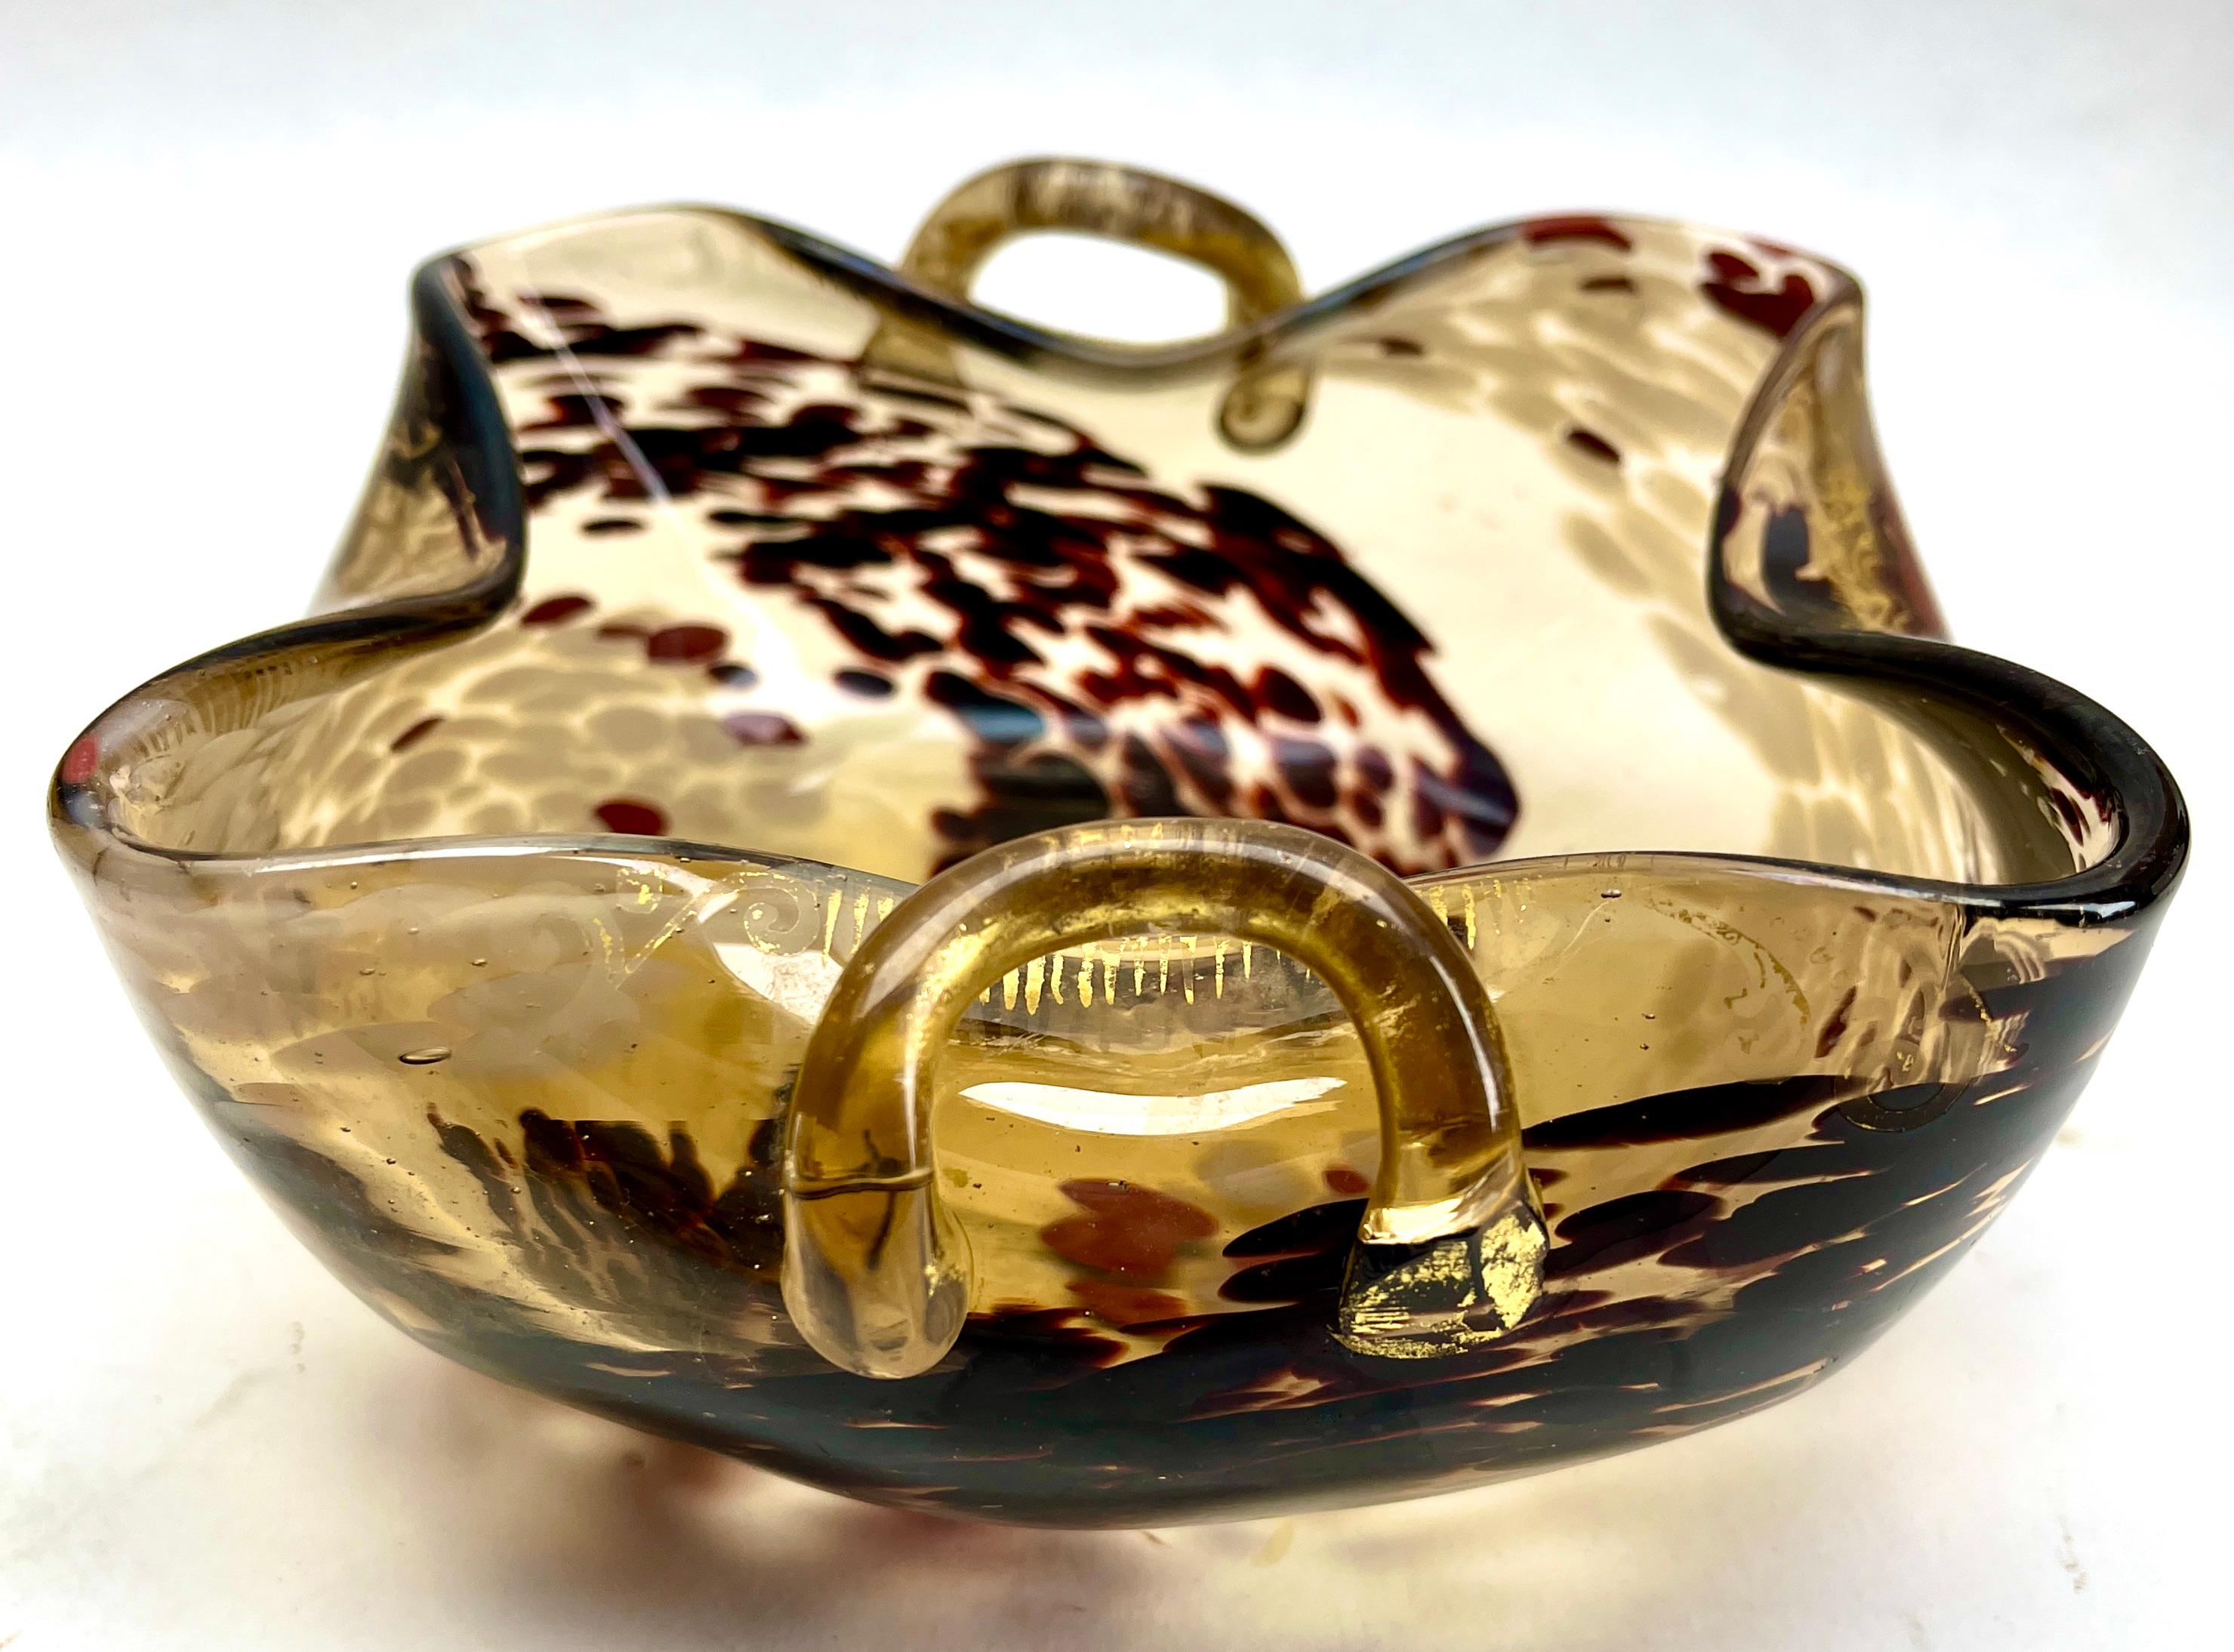 Murano glass Chartreuse and Gold Deco ruffle Biomorphic bowls of 1950s

Murano glass biomorphic ruffled edge bowls gold fleck made in Italy.
Rare Murano hand blown iridescent surface art glass flared rim ribbed bowl.

The piece is in excellent